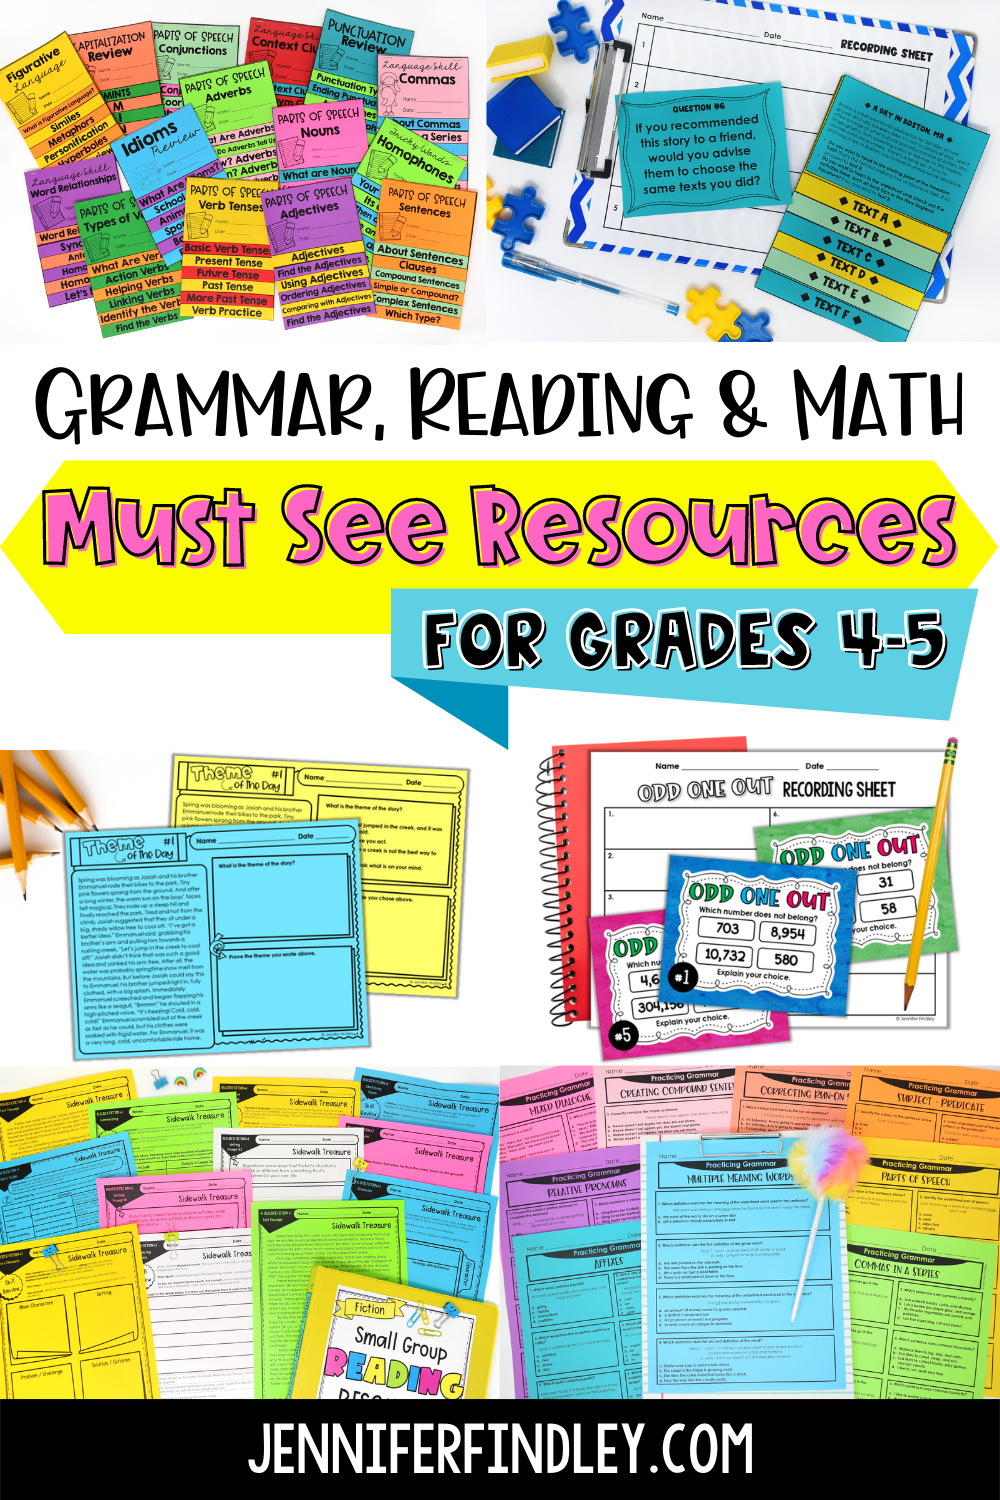 Learn more about my new resources for 4th grade and 5th grade grammar, reading, and math!